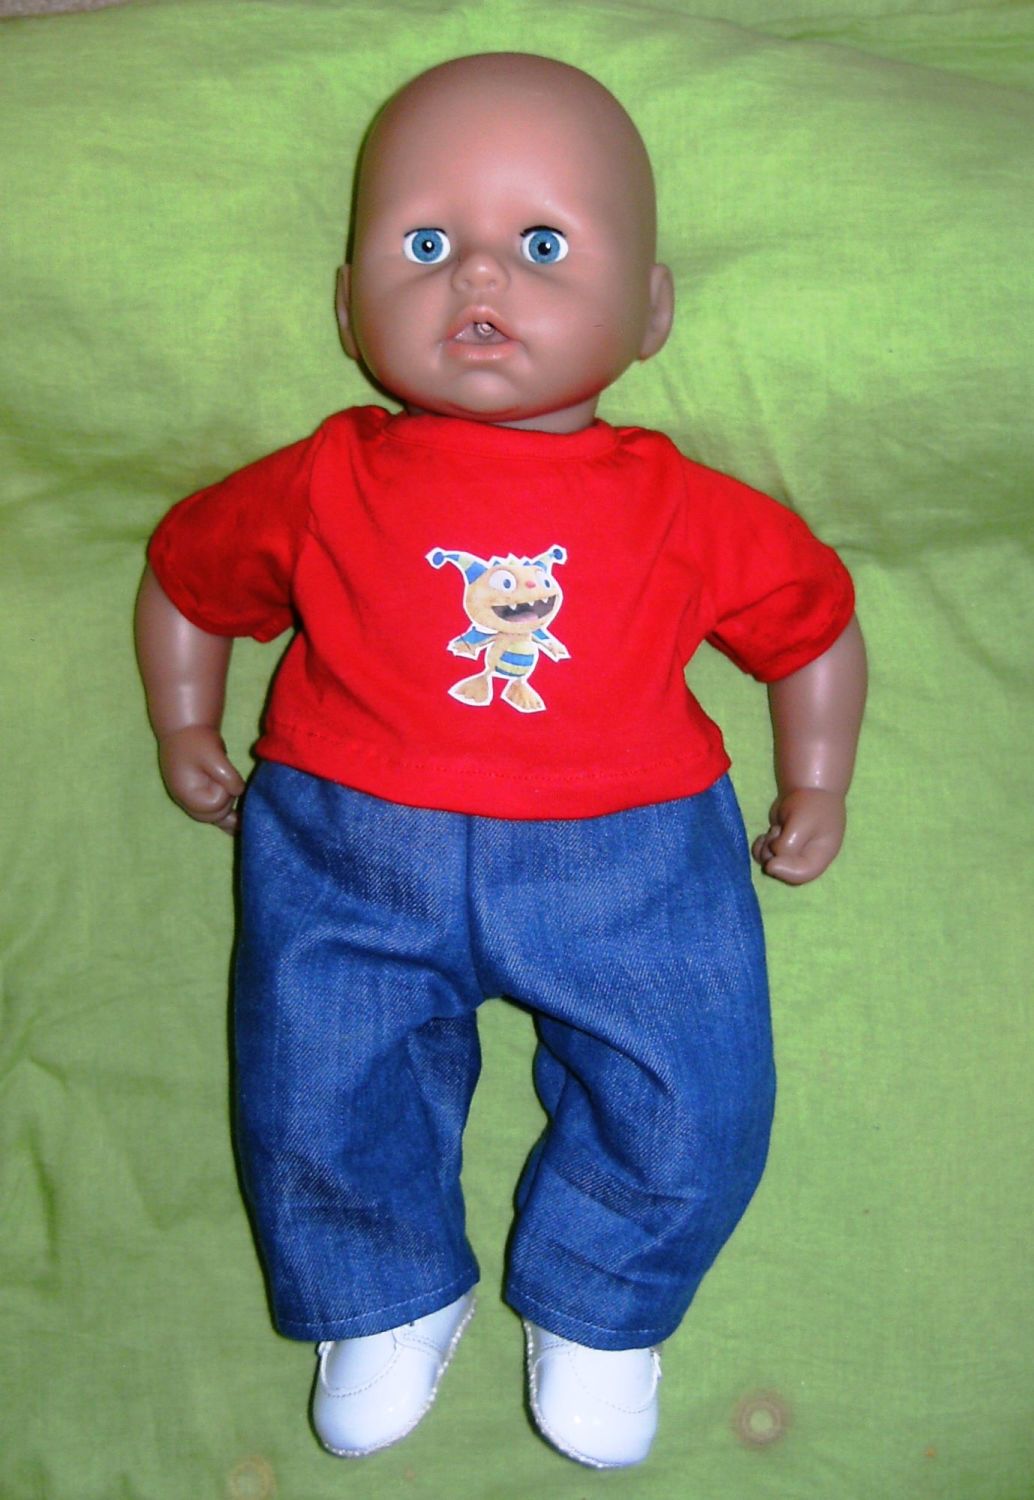 Doll's jeans and tee shirt for Baby George doll